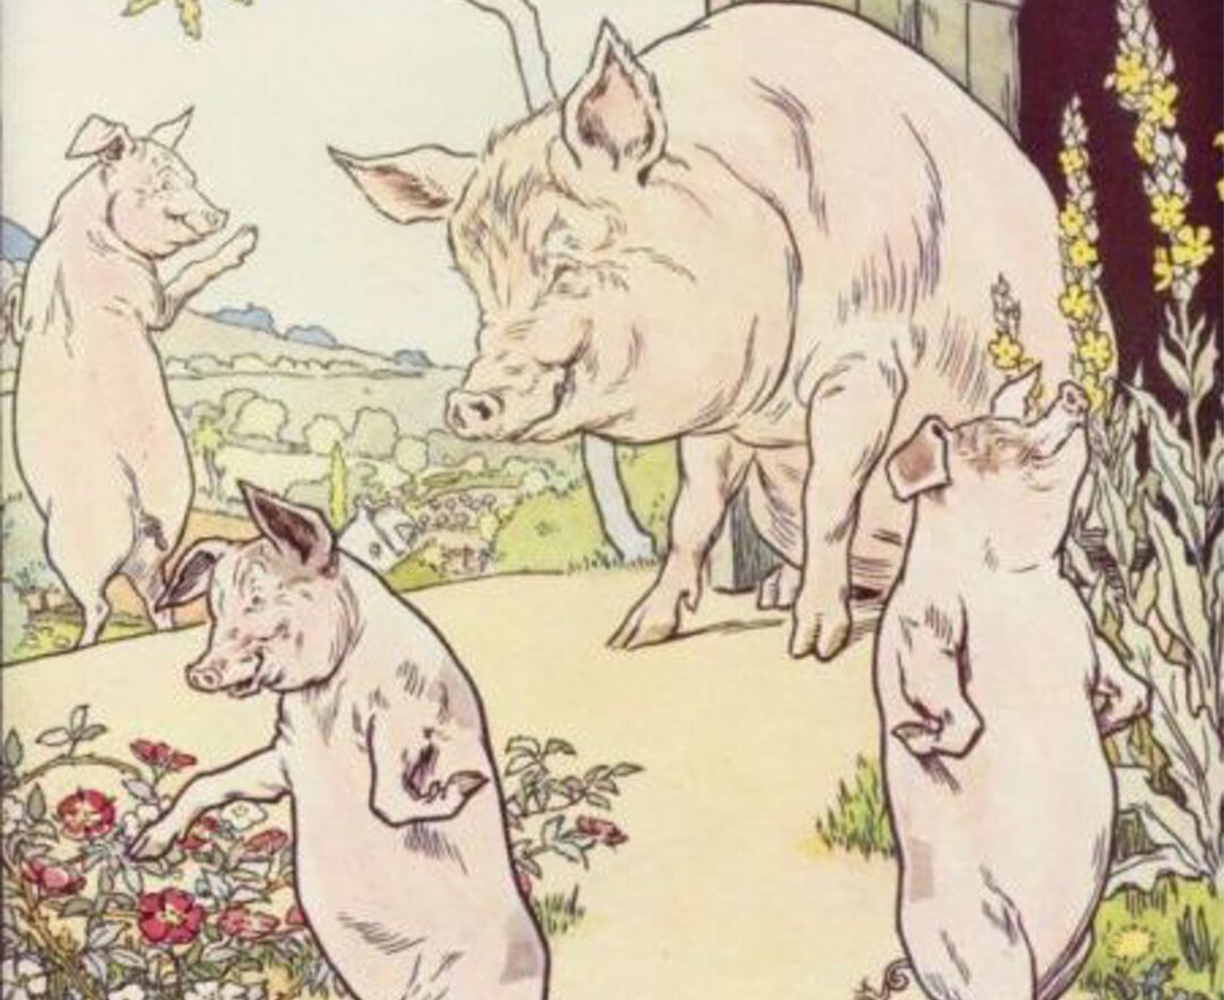 The Three Little Pigs #6 episode cover